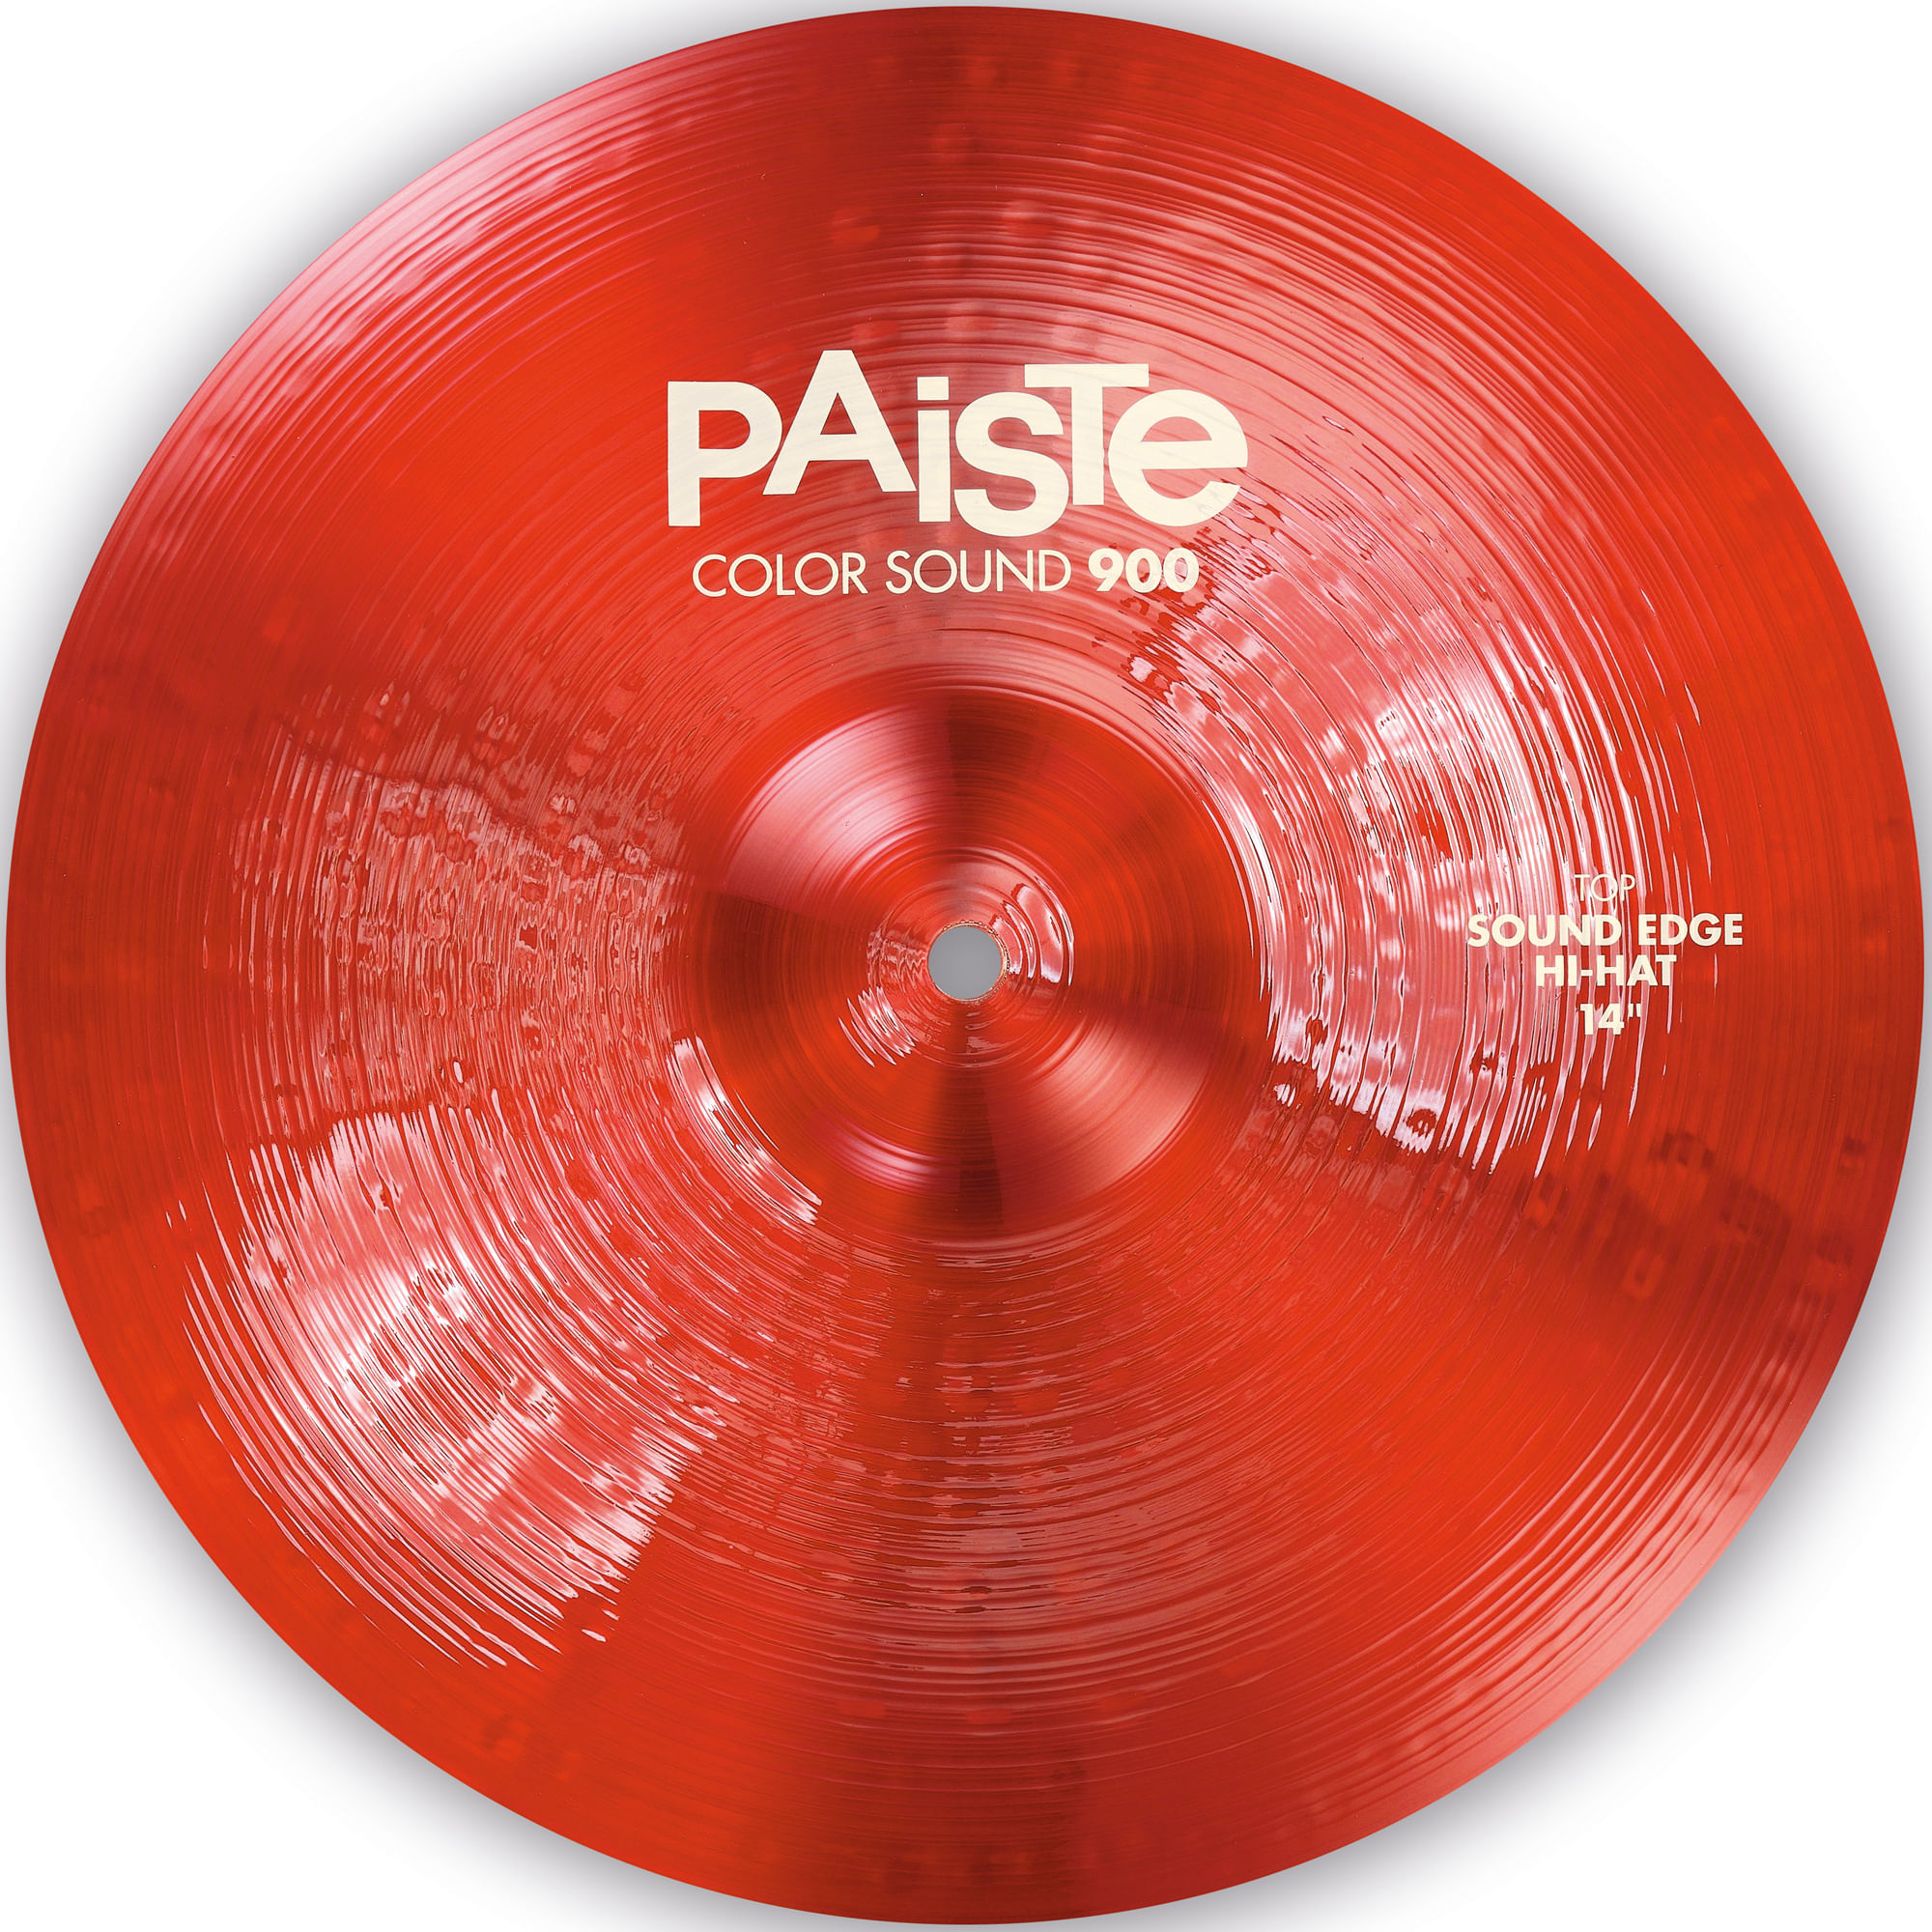 Paiste Color Sound 900 Sound Edge Hi-Hat Cymbal 14", Red Cosmo Music